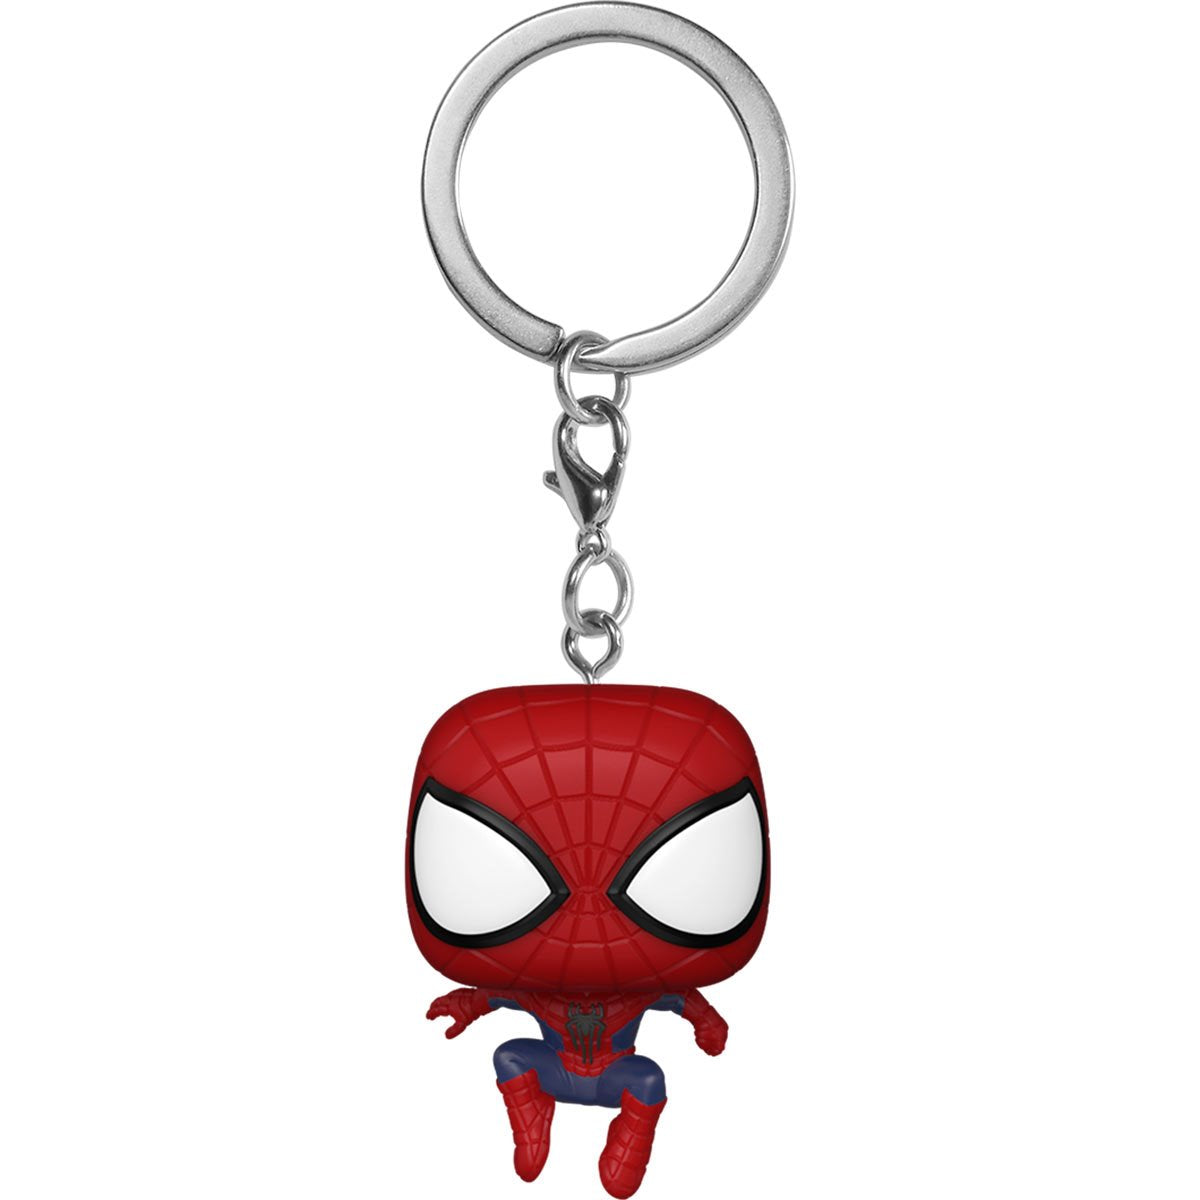 Spider-Man No Way Home The Amazing Spider-Man Leaping Funko Pocket Pop! Key Chain